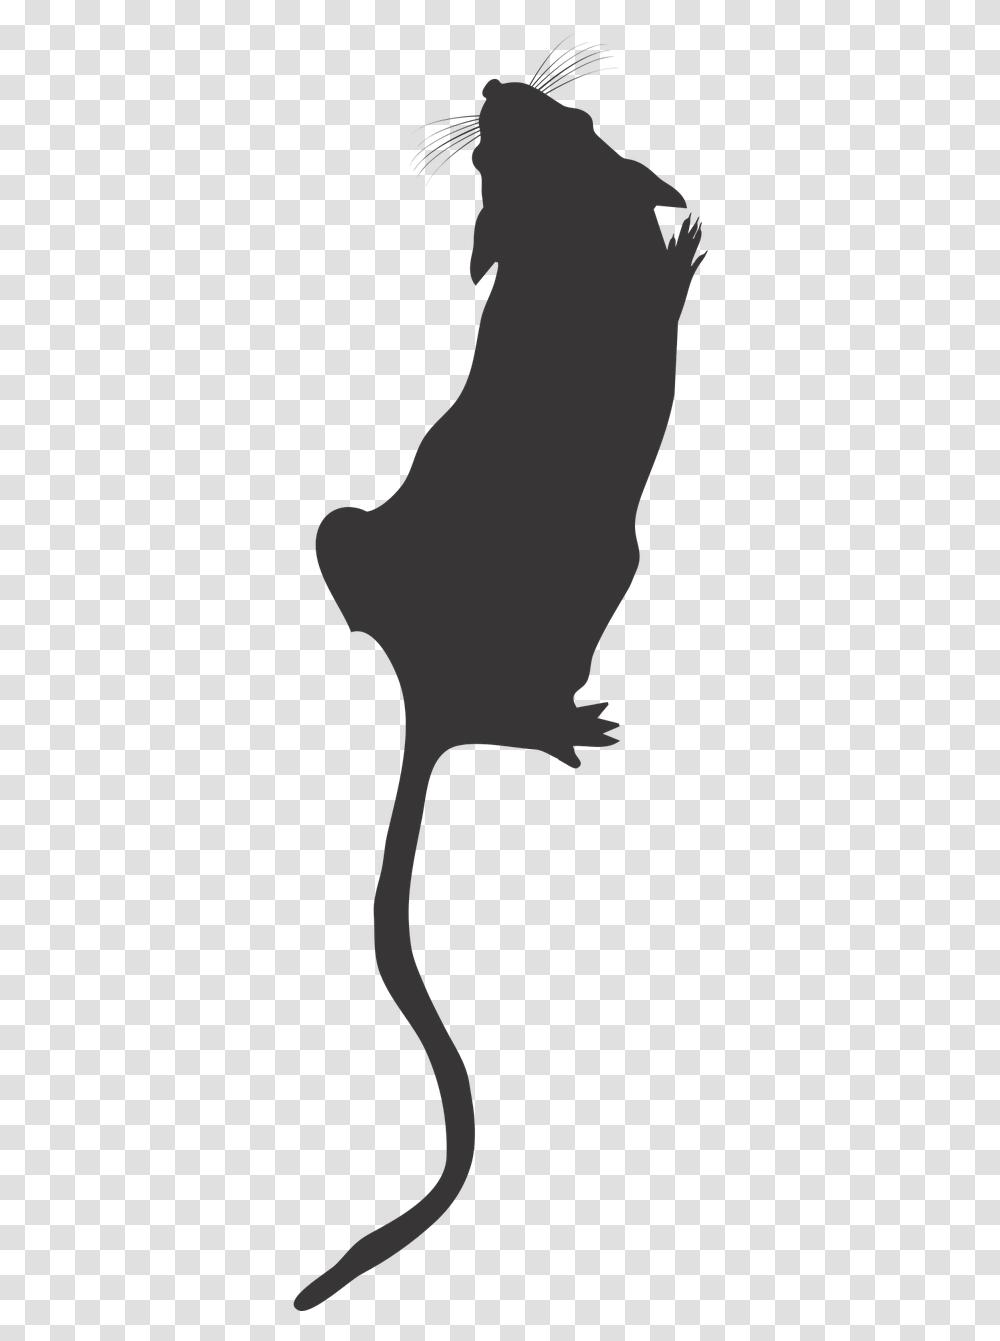 Lab Mouse Top View Mouse Silhouette Lab Mouse Icon Rat Silhouette Top View, Plant, Person, Human, Animal Transparent Png